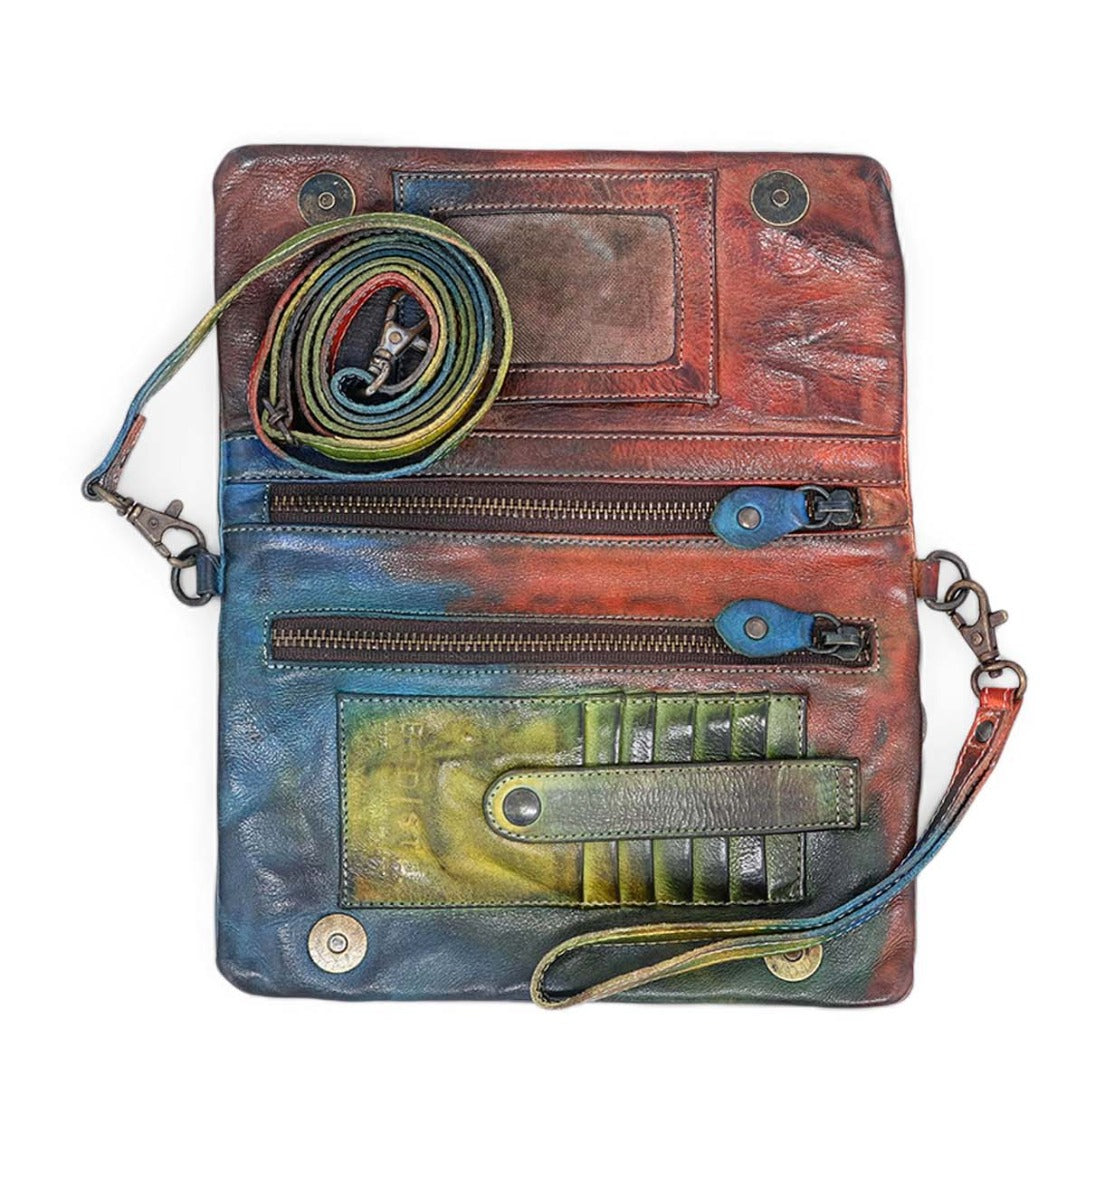 Inside a Cadence colorful leather clutch bag by Bed Stu.